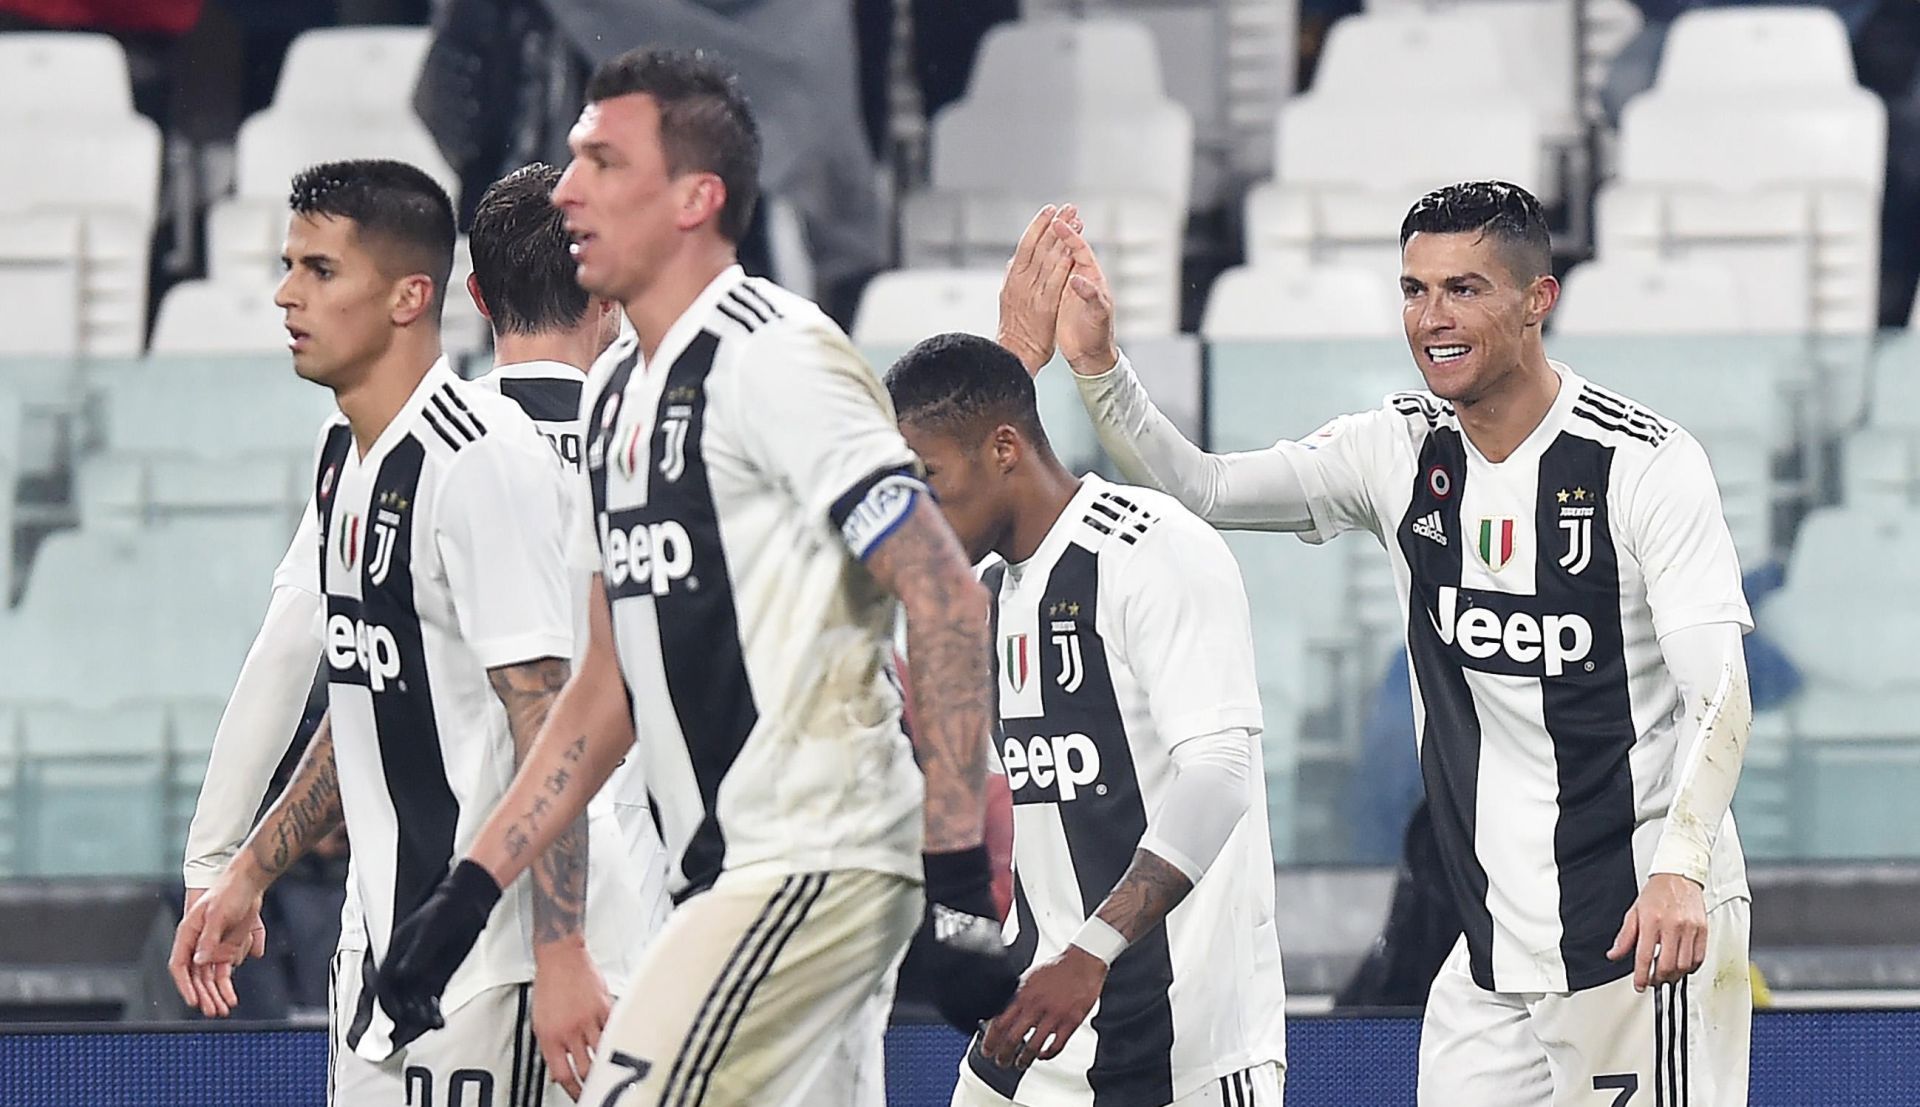 epa07339557 Juventus' Cristiano Ronaldo (R) celebrates with his teammates after scoring the opening goal during the Italian Serie A soccer match Juventus FC vs Parma Calcio at the Allianz stadium in Turin, Italy, 02 February 2019.  EPA/ALESSANDRO DI MARCO